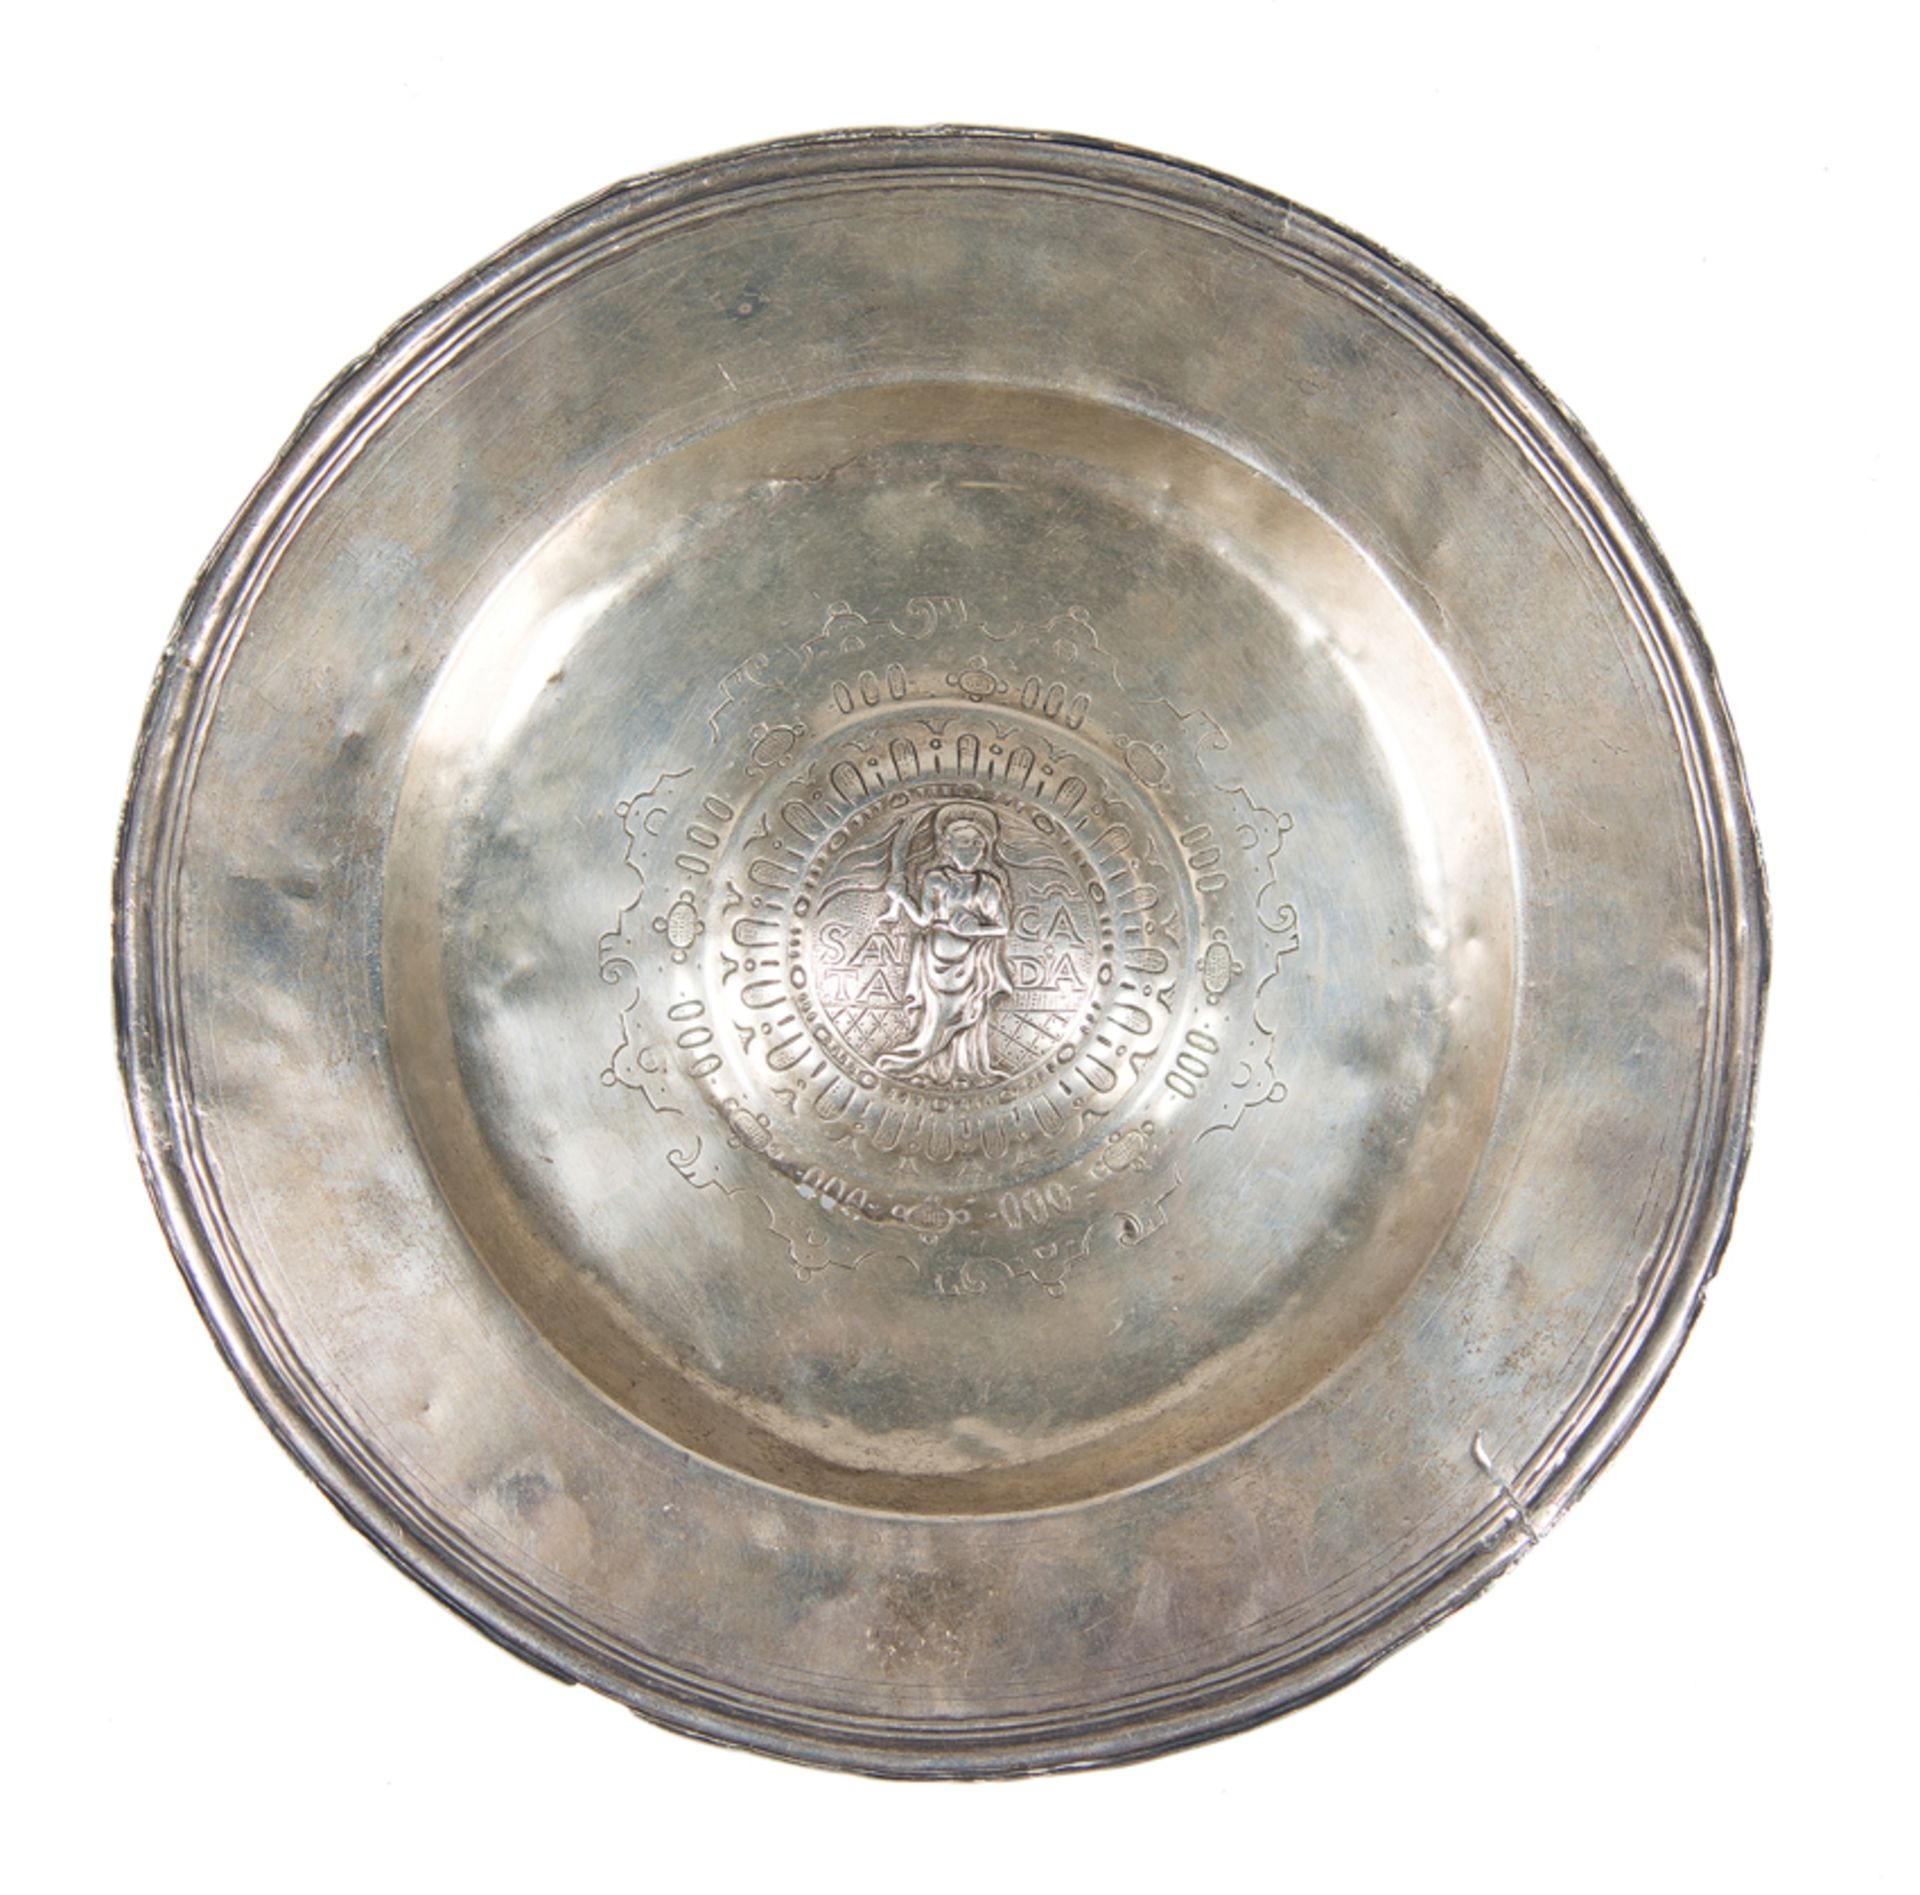 Silver Plate in its natural colour. Marked 'DER' Tortosa - Late 16th Century